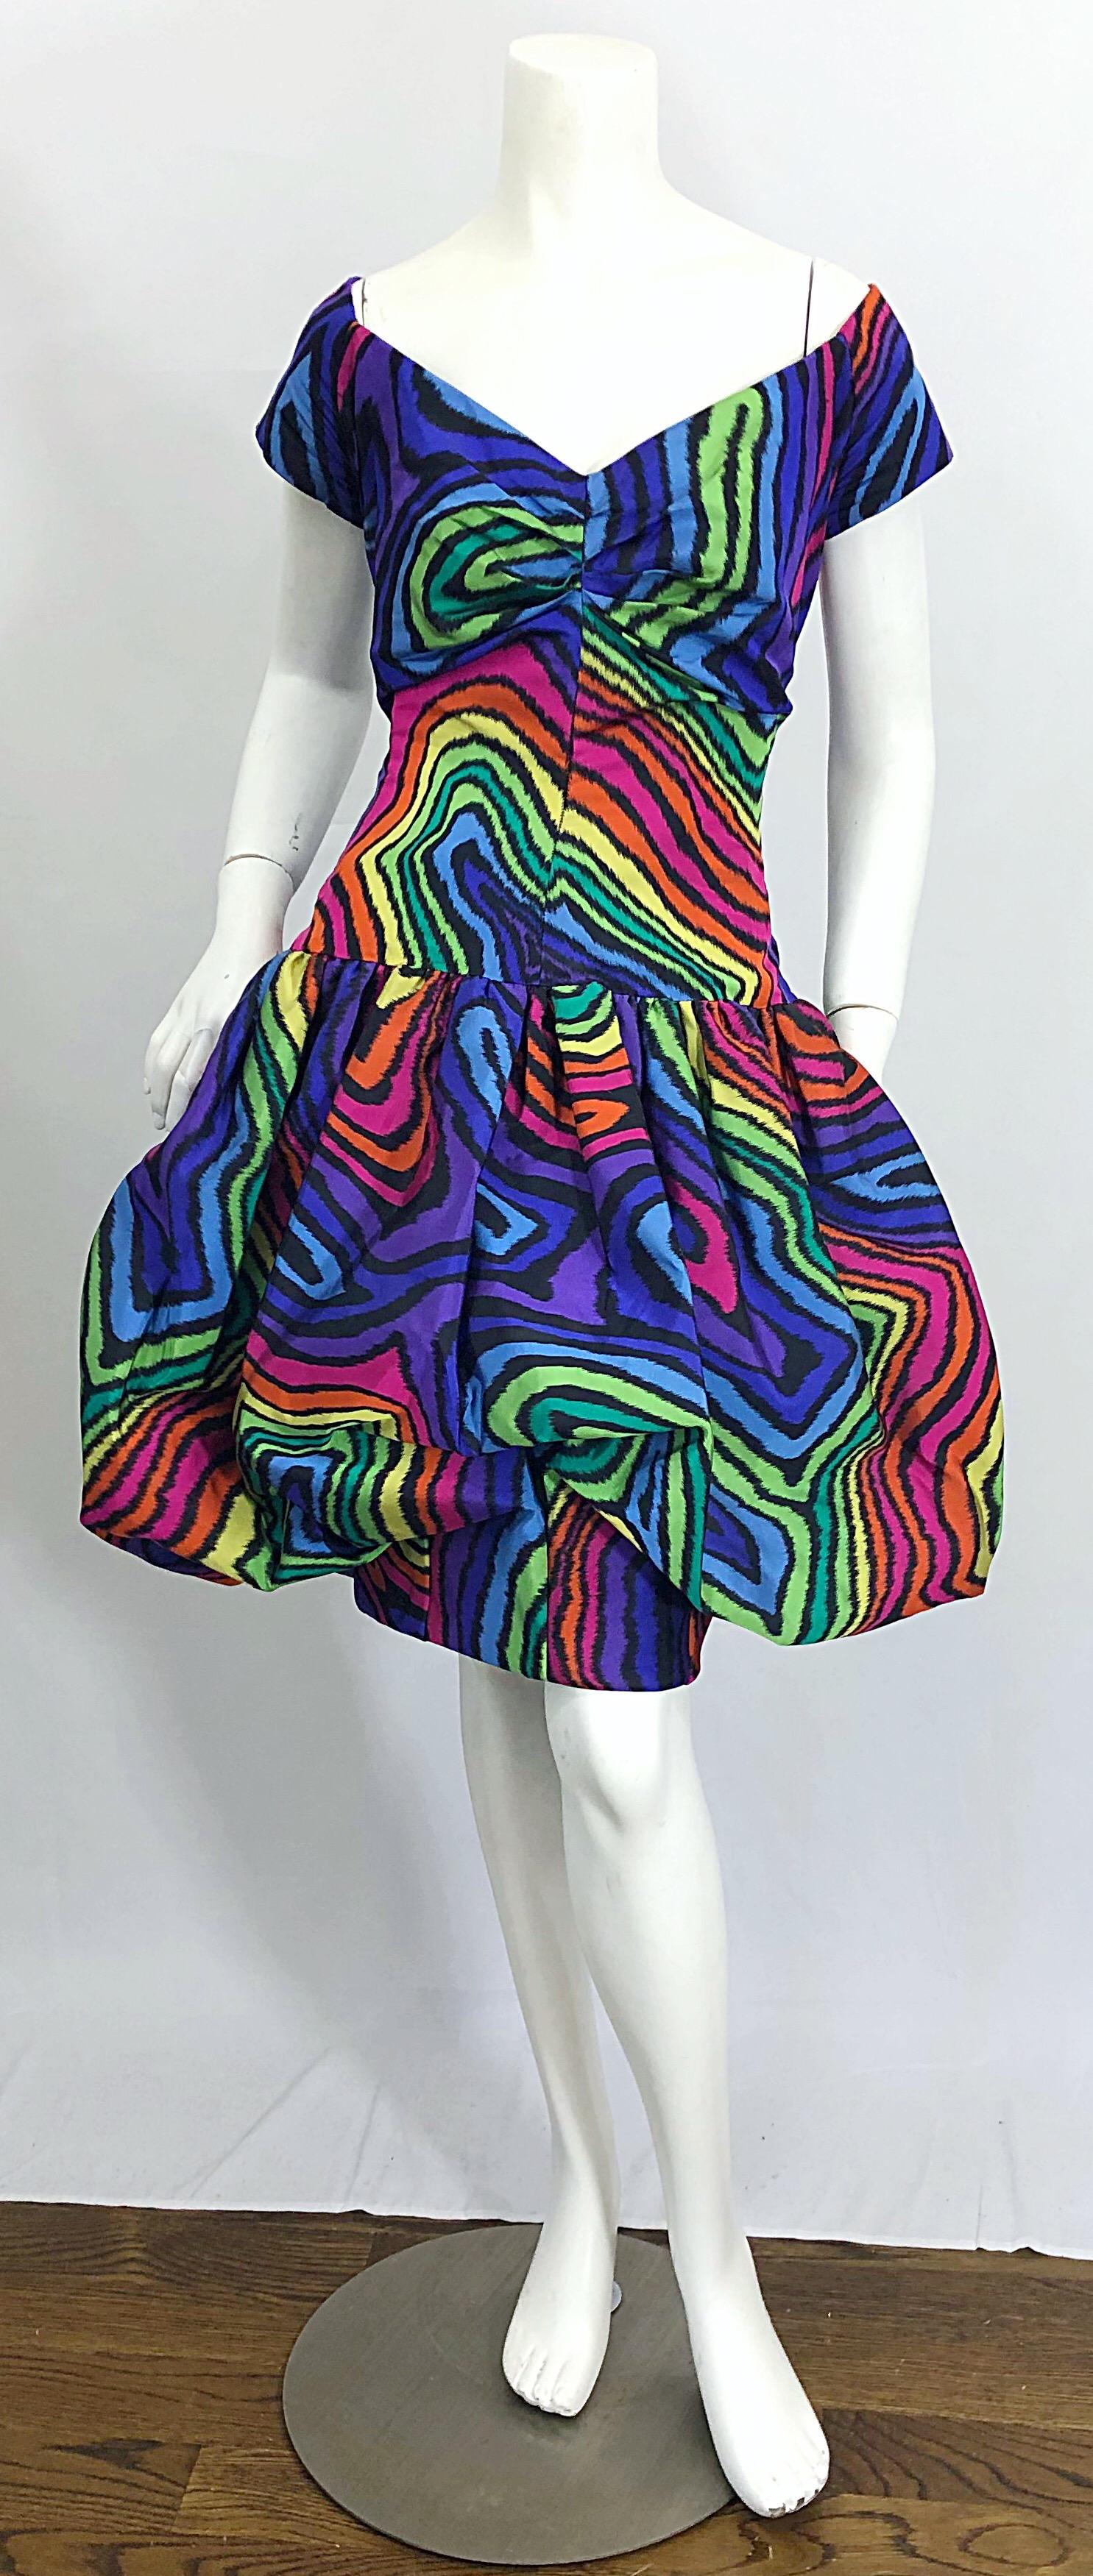 Amazing vintage 80s does 50s Italian made rainbow colored squiggly abstract patterned pouf bubble dress! I picked this rare gem up in Rome from a prominent estate last month. Couture quality with so much attention to detail. Tailored fitted bodice